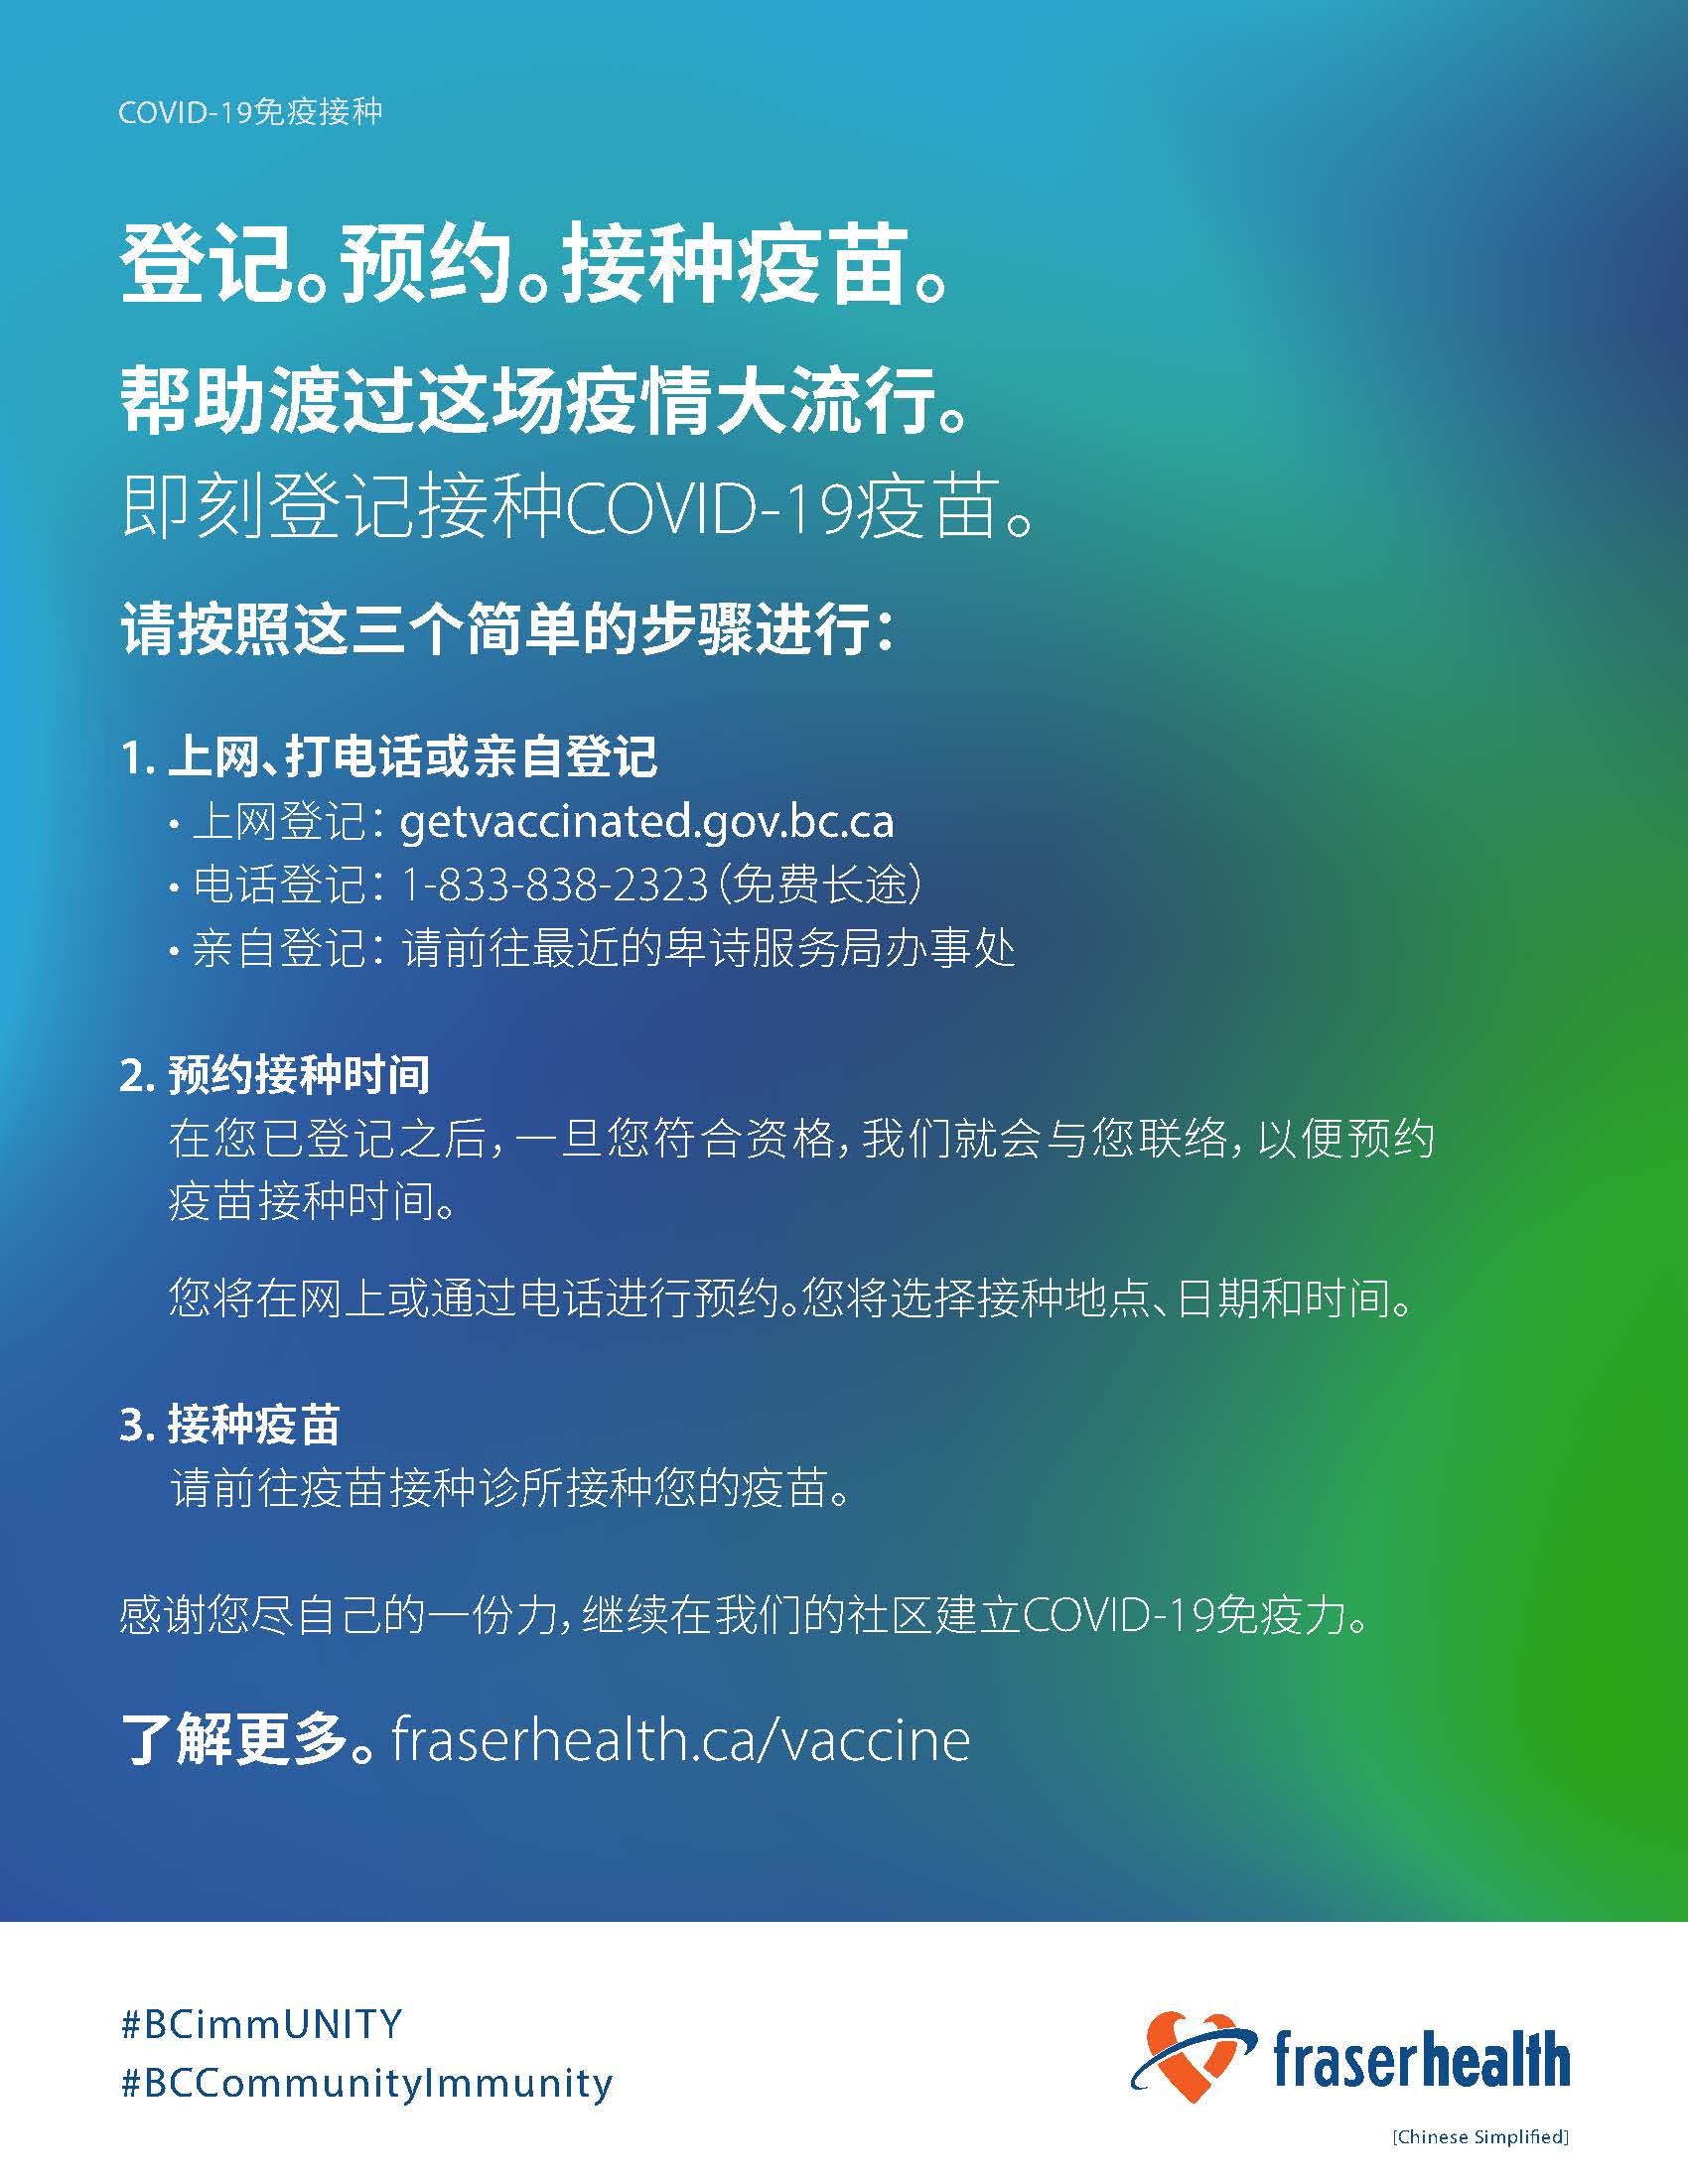 Vaccine registration for Chinese Simplified in colour